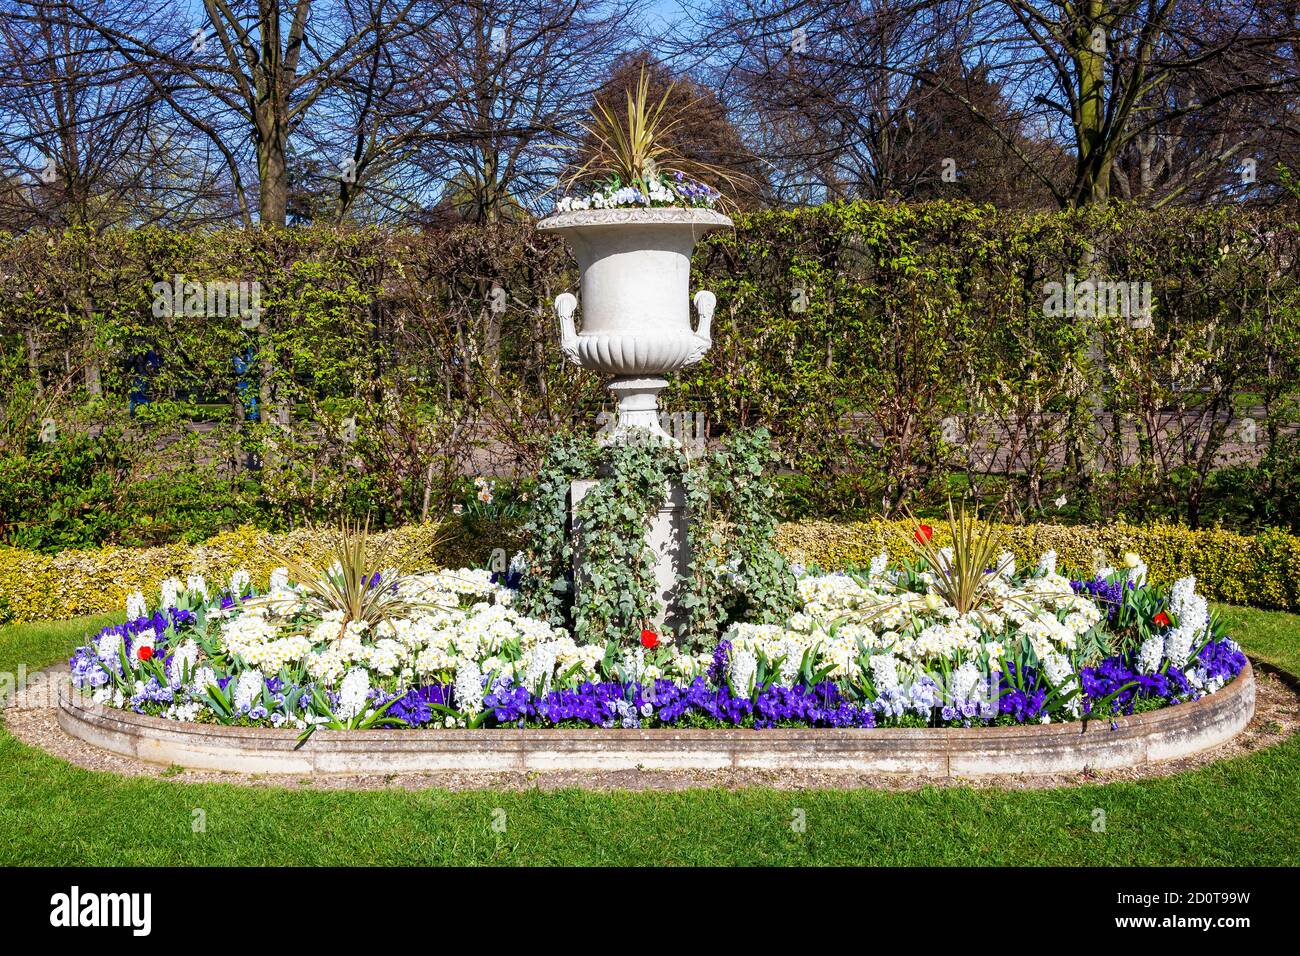 Regents Park spring urn flower display in a floral flower bed which is a popular public open space in London England UK and a popular travel destinati Stock Photo